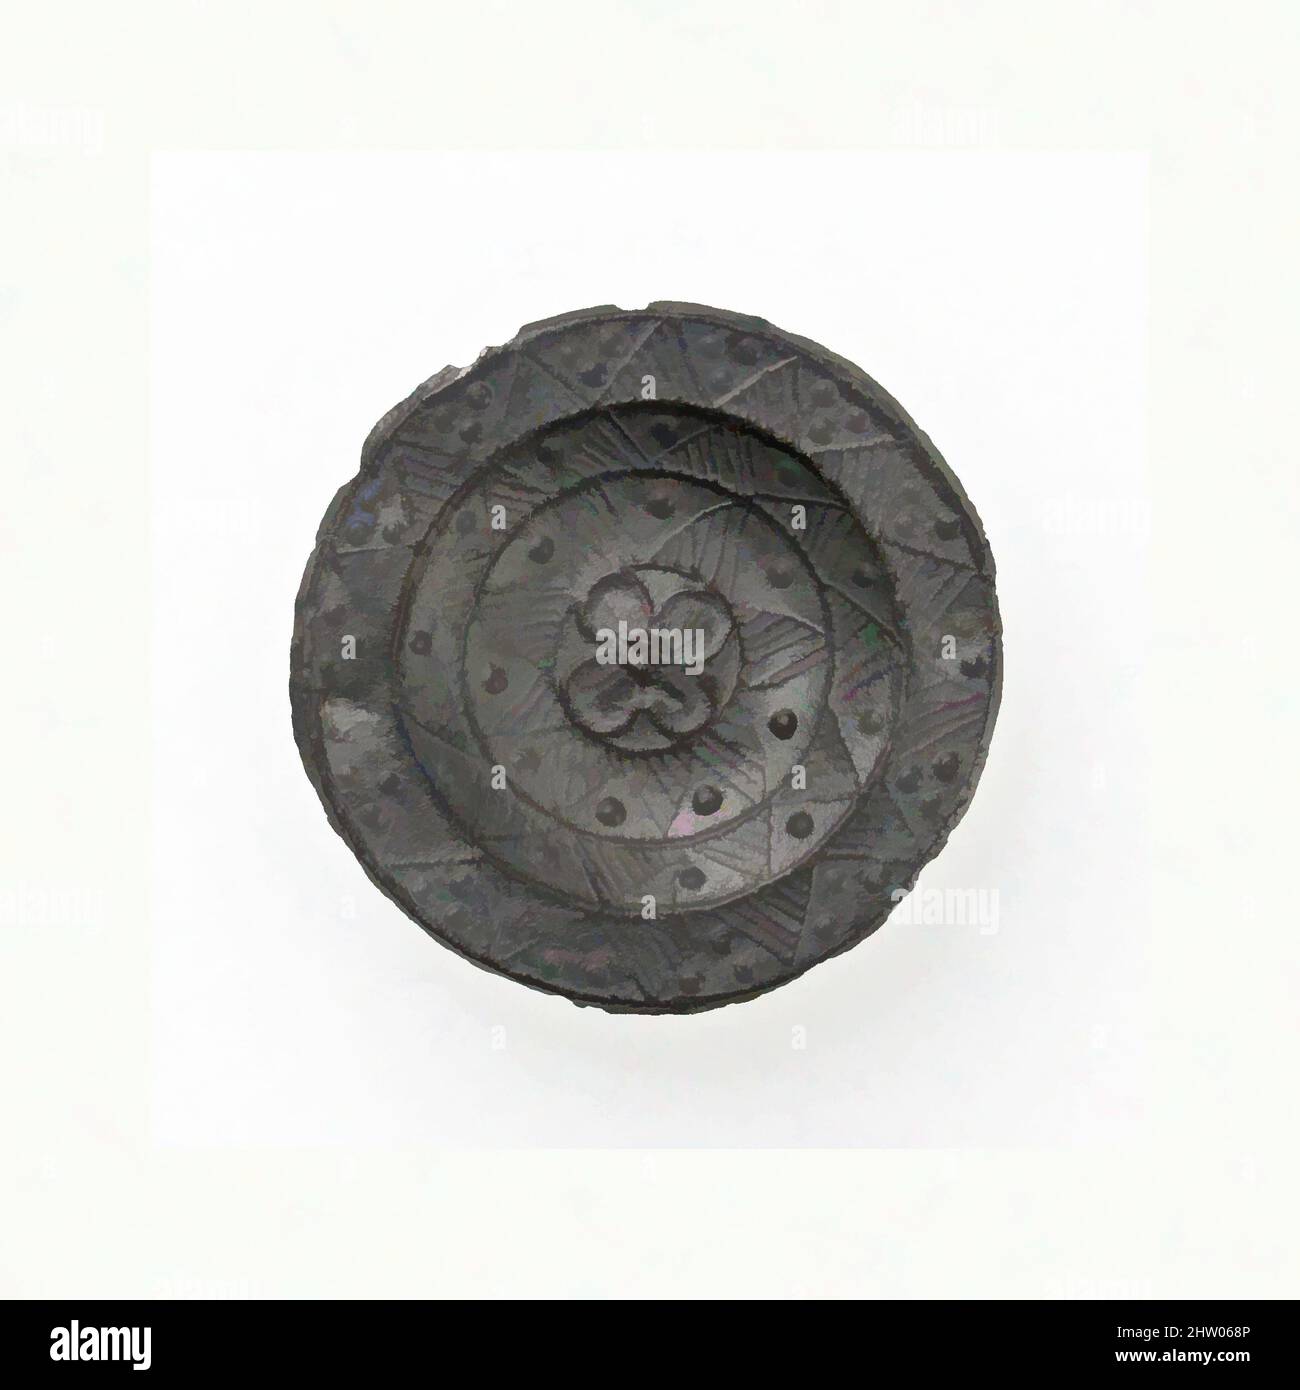 Art inspired by Pilgrim's Badge, 14th–16th century, French, Lead, Overall: 1 in. (2.5 cm), Metalwork-Lead, Classic works modernized by Artotop with a splash of modernity. Shapes, color and value, eye-catching visual impact on art. Emotions through freedom of artworks in a contemporary way. A timeless message pursuing a wildly creative new direction. Artists turning to the digital medium and creating the Artotop NFT Stock Photo